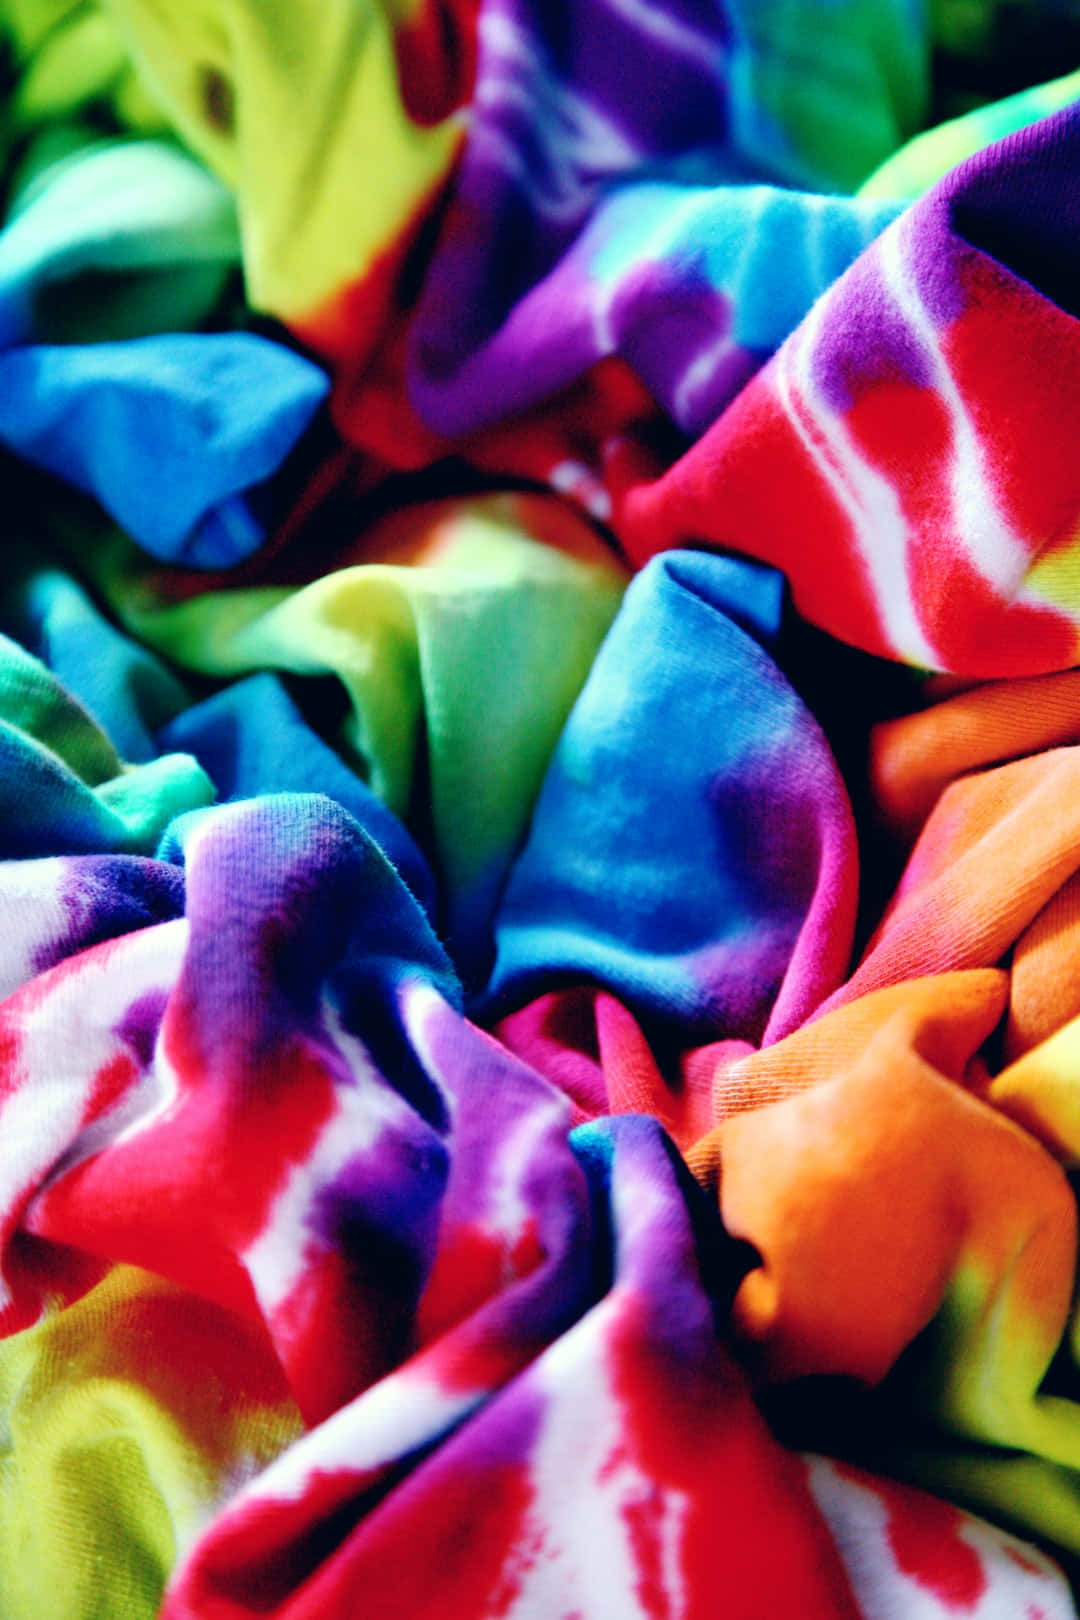 Bright&Colorful Tie-Dye for Your High Resolution Backgrounds